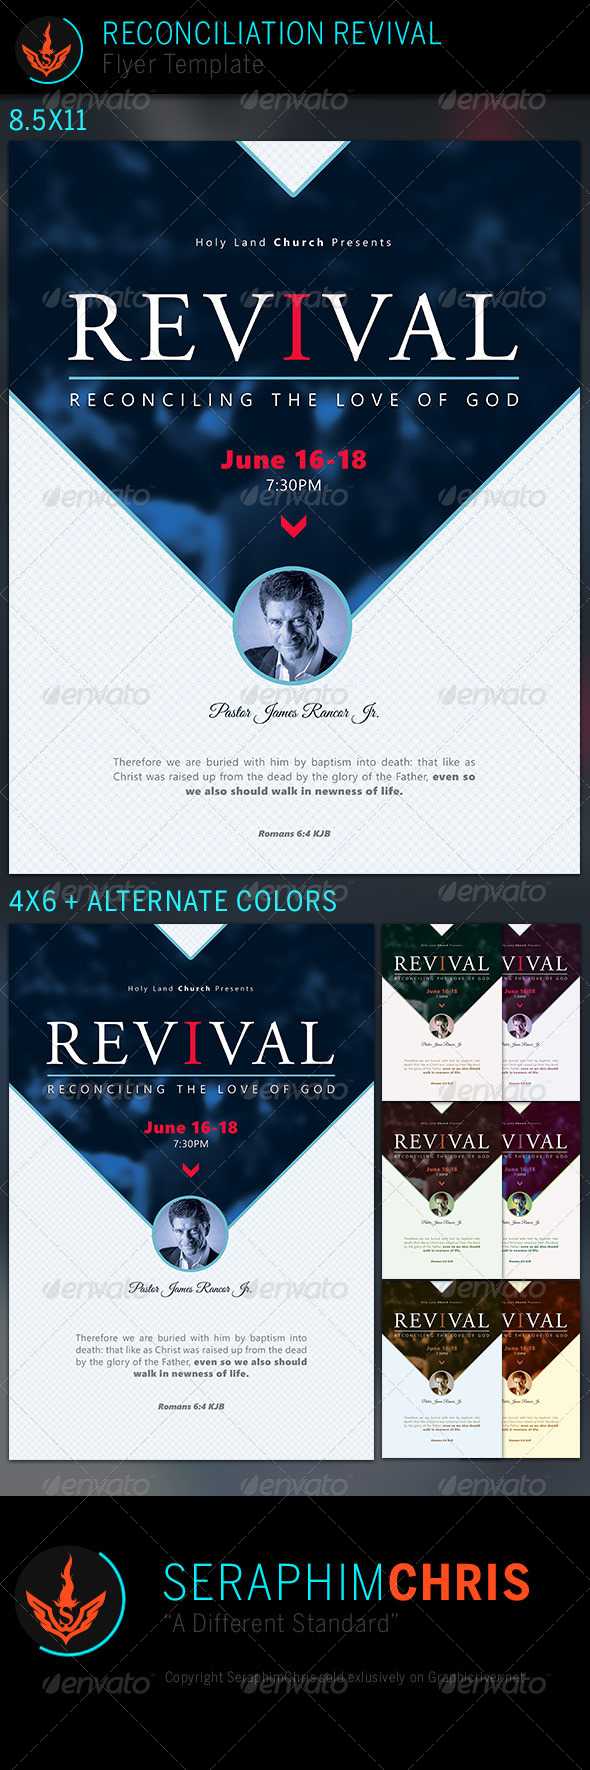 Revival Flyer Graphics, Designs & Templates From Graphicriver Pertaining To Church Revival Flyer Template Free